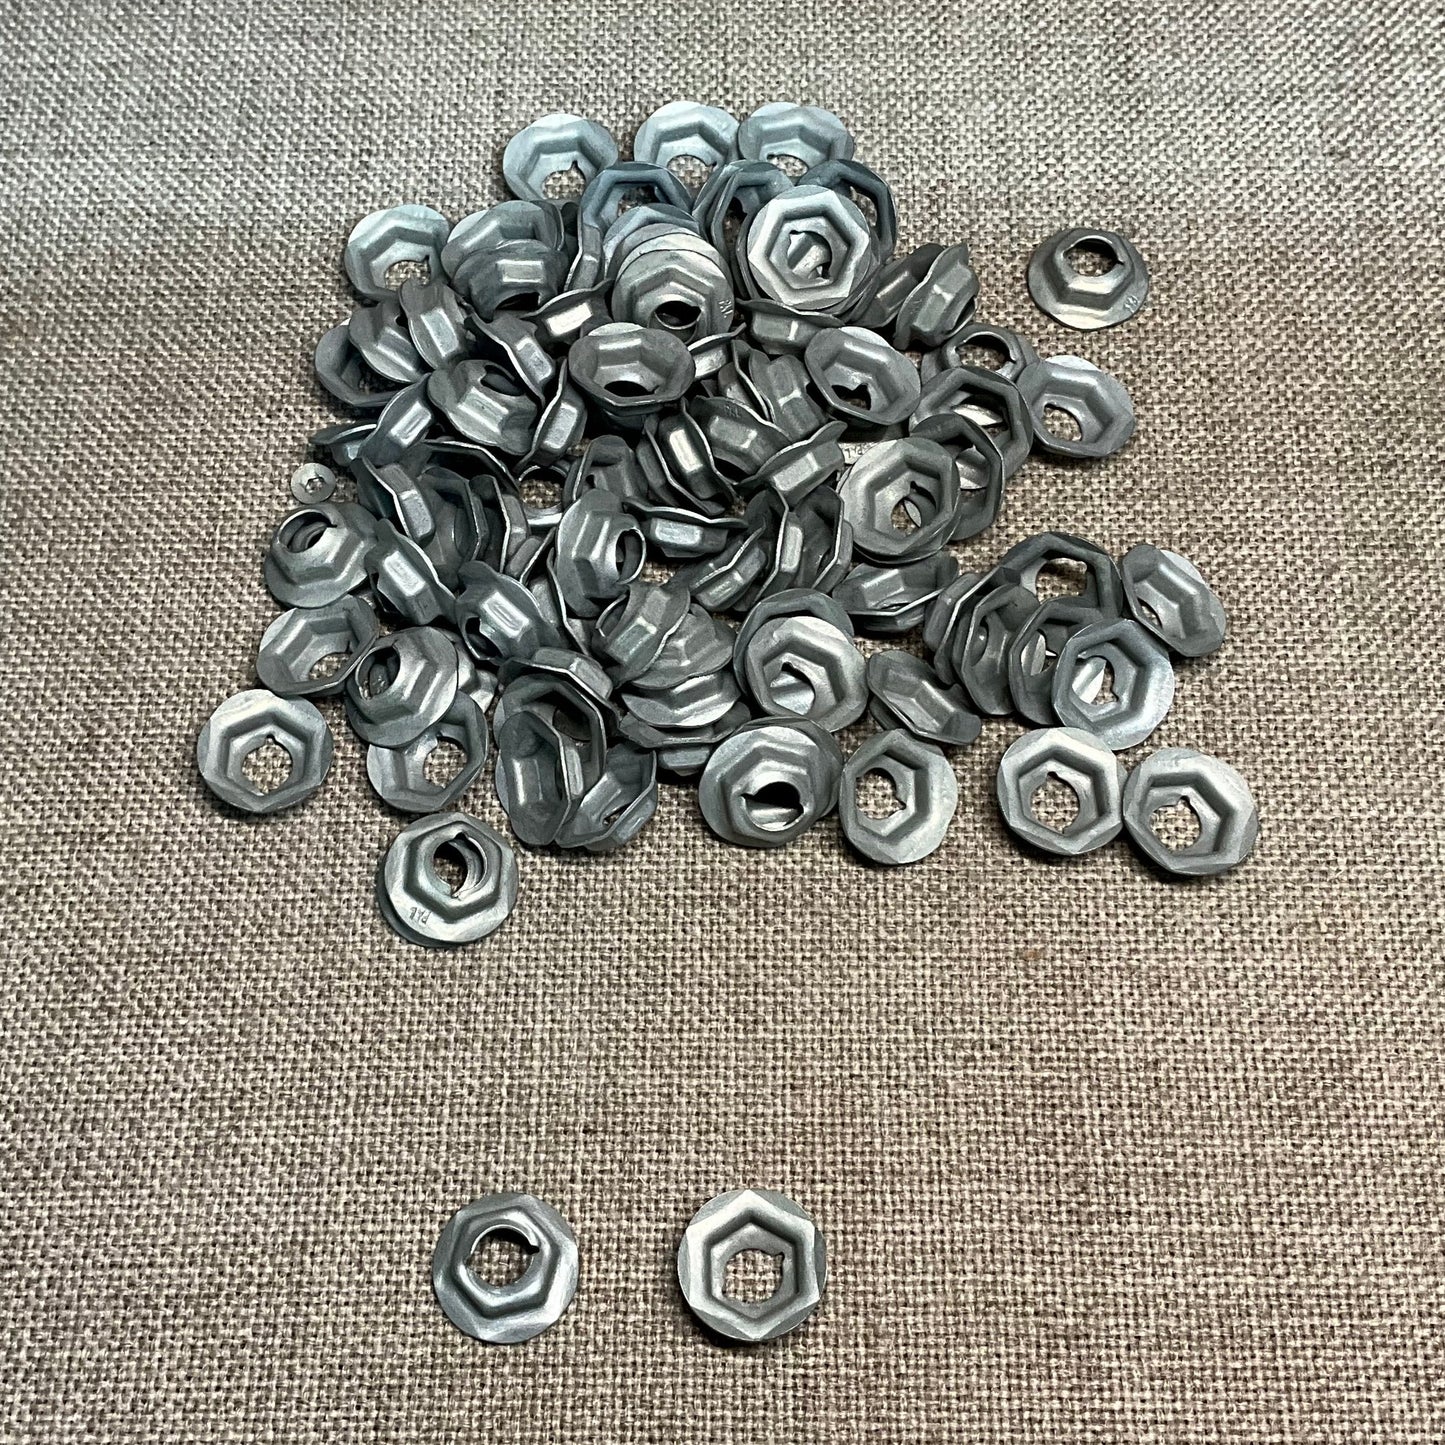 100 Washer Type Self - Threaded Nut Auveco 15711 OEM:11502507,11509535,11514282